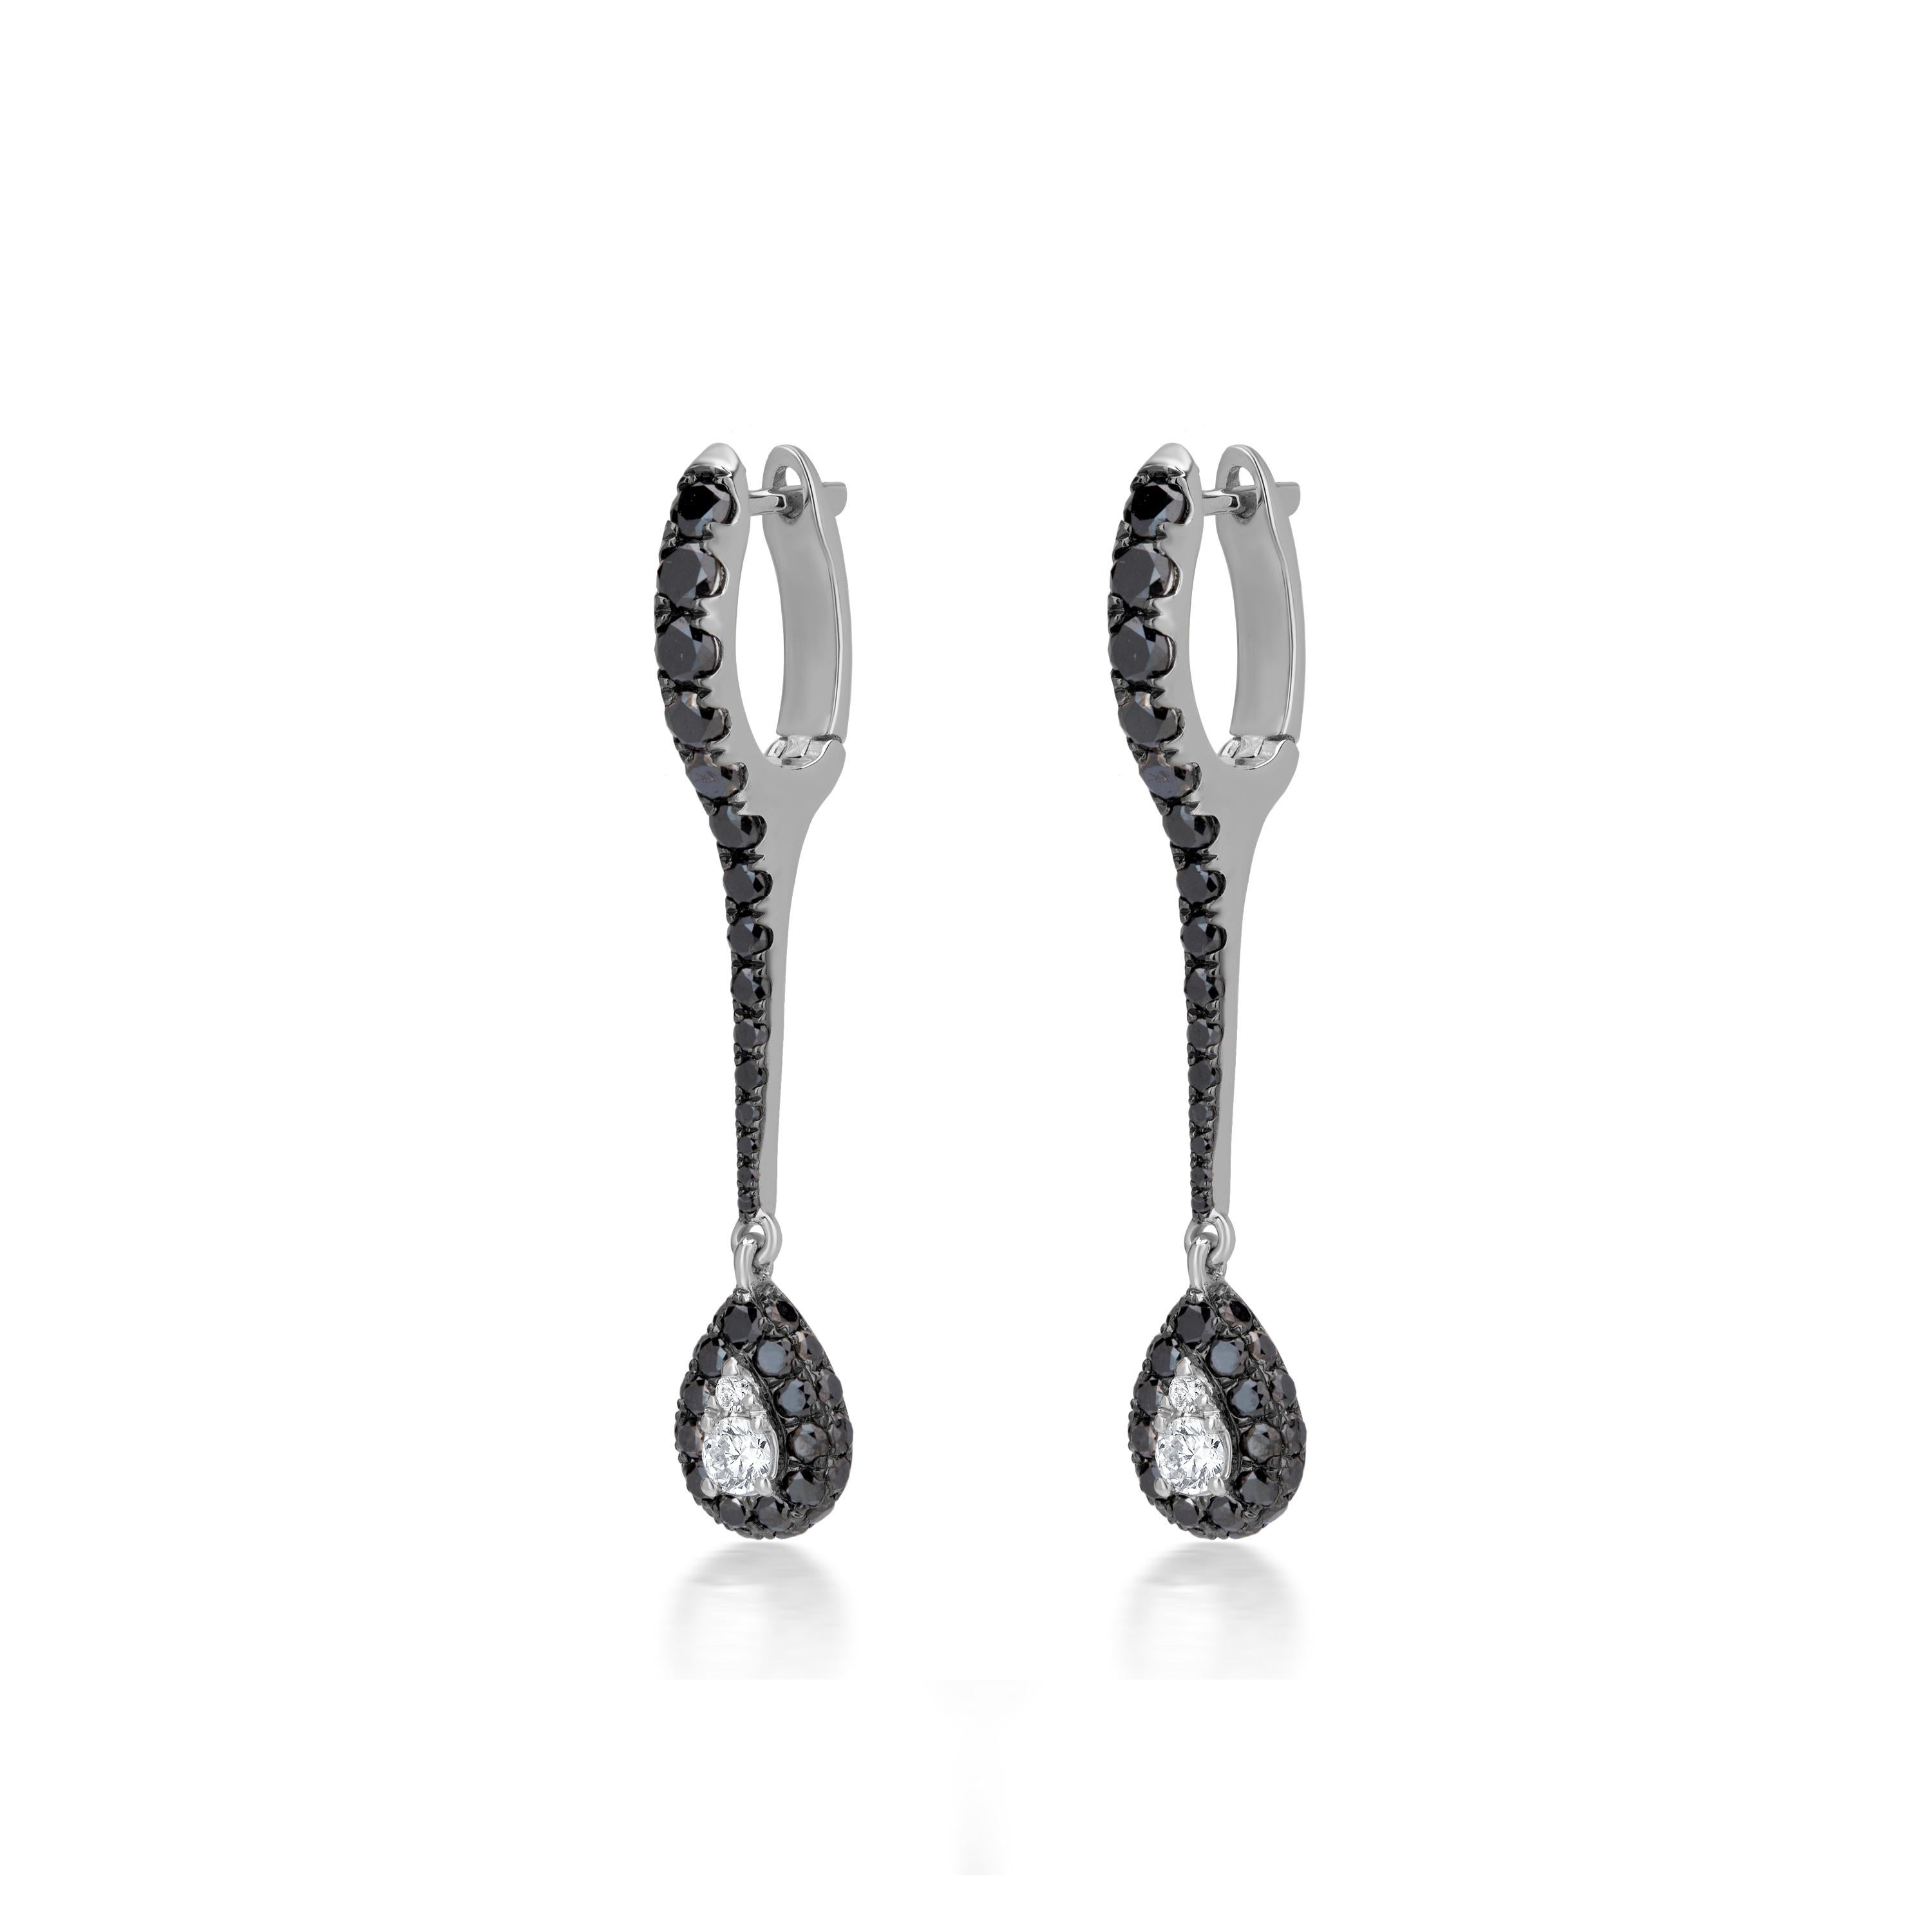 Manifested on an 18K White Gold, Black Rhodium body, this pair of dangling earring looks like an exclamation sign. Uniquely crafted by Luxle, this sleek pair of jewelry has round full-cut white and black diamonds in micro pave and illusion setting.